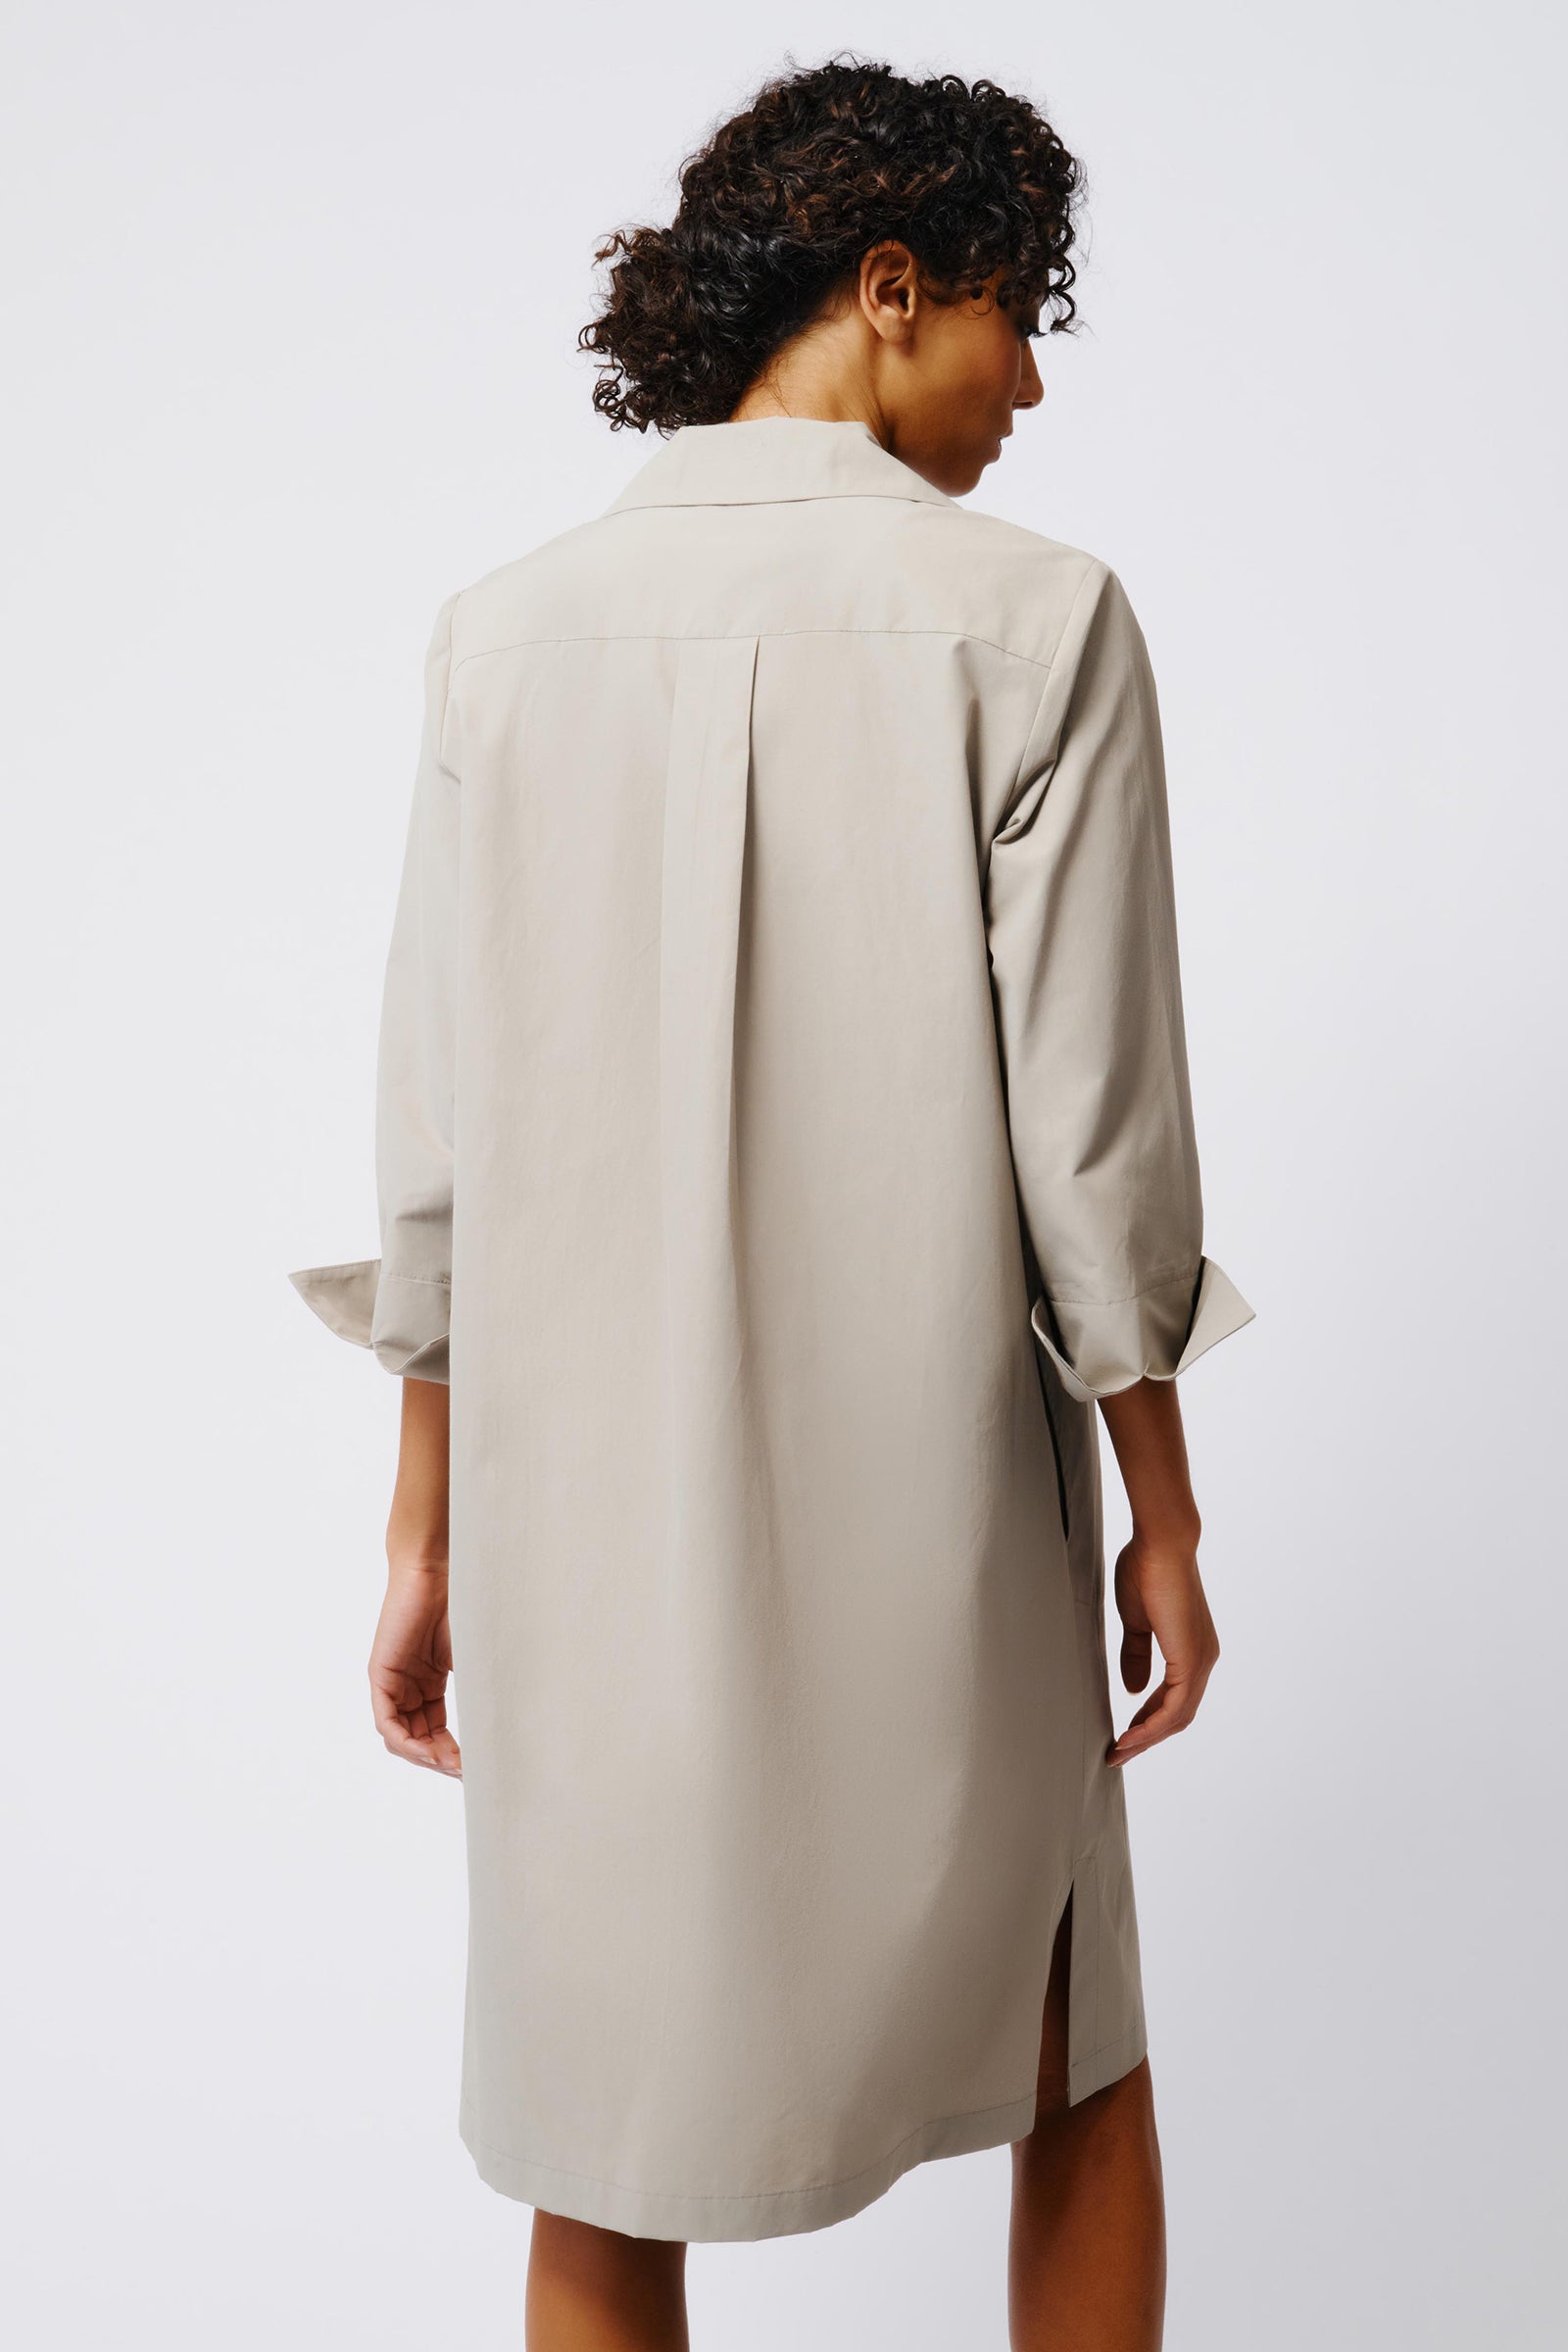 Kal Rieman Collared V Neck Dress in Military Khaki on Model Back View Crop